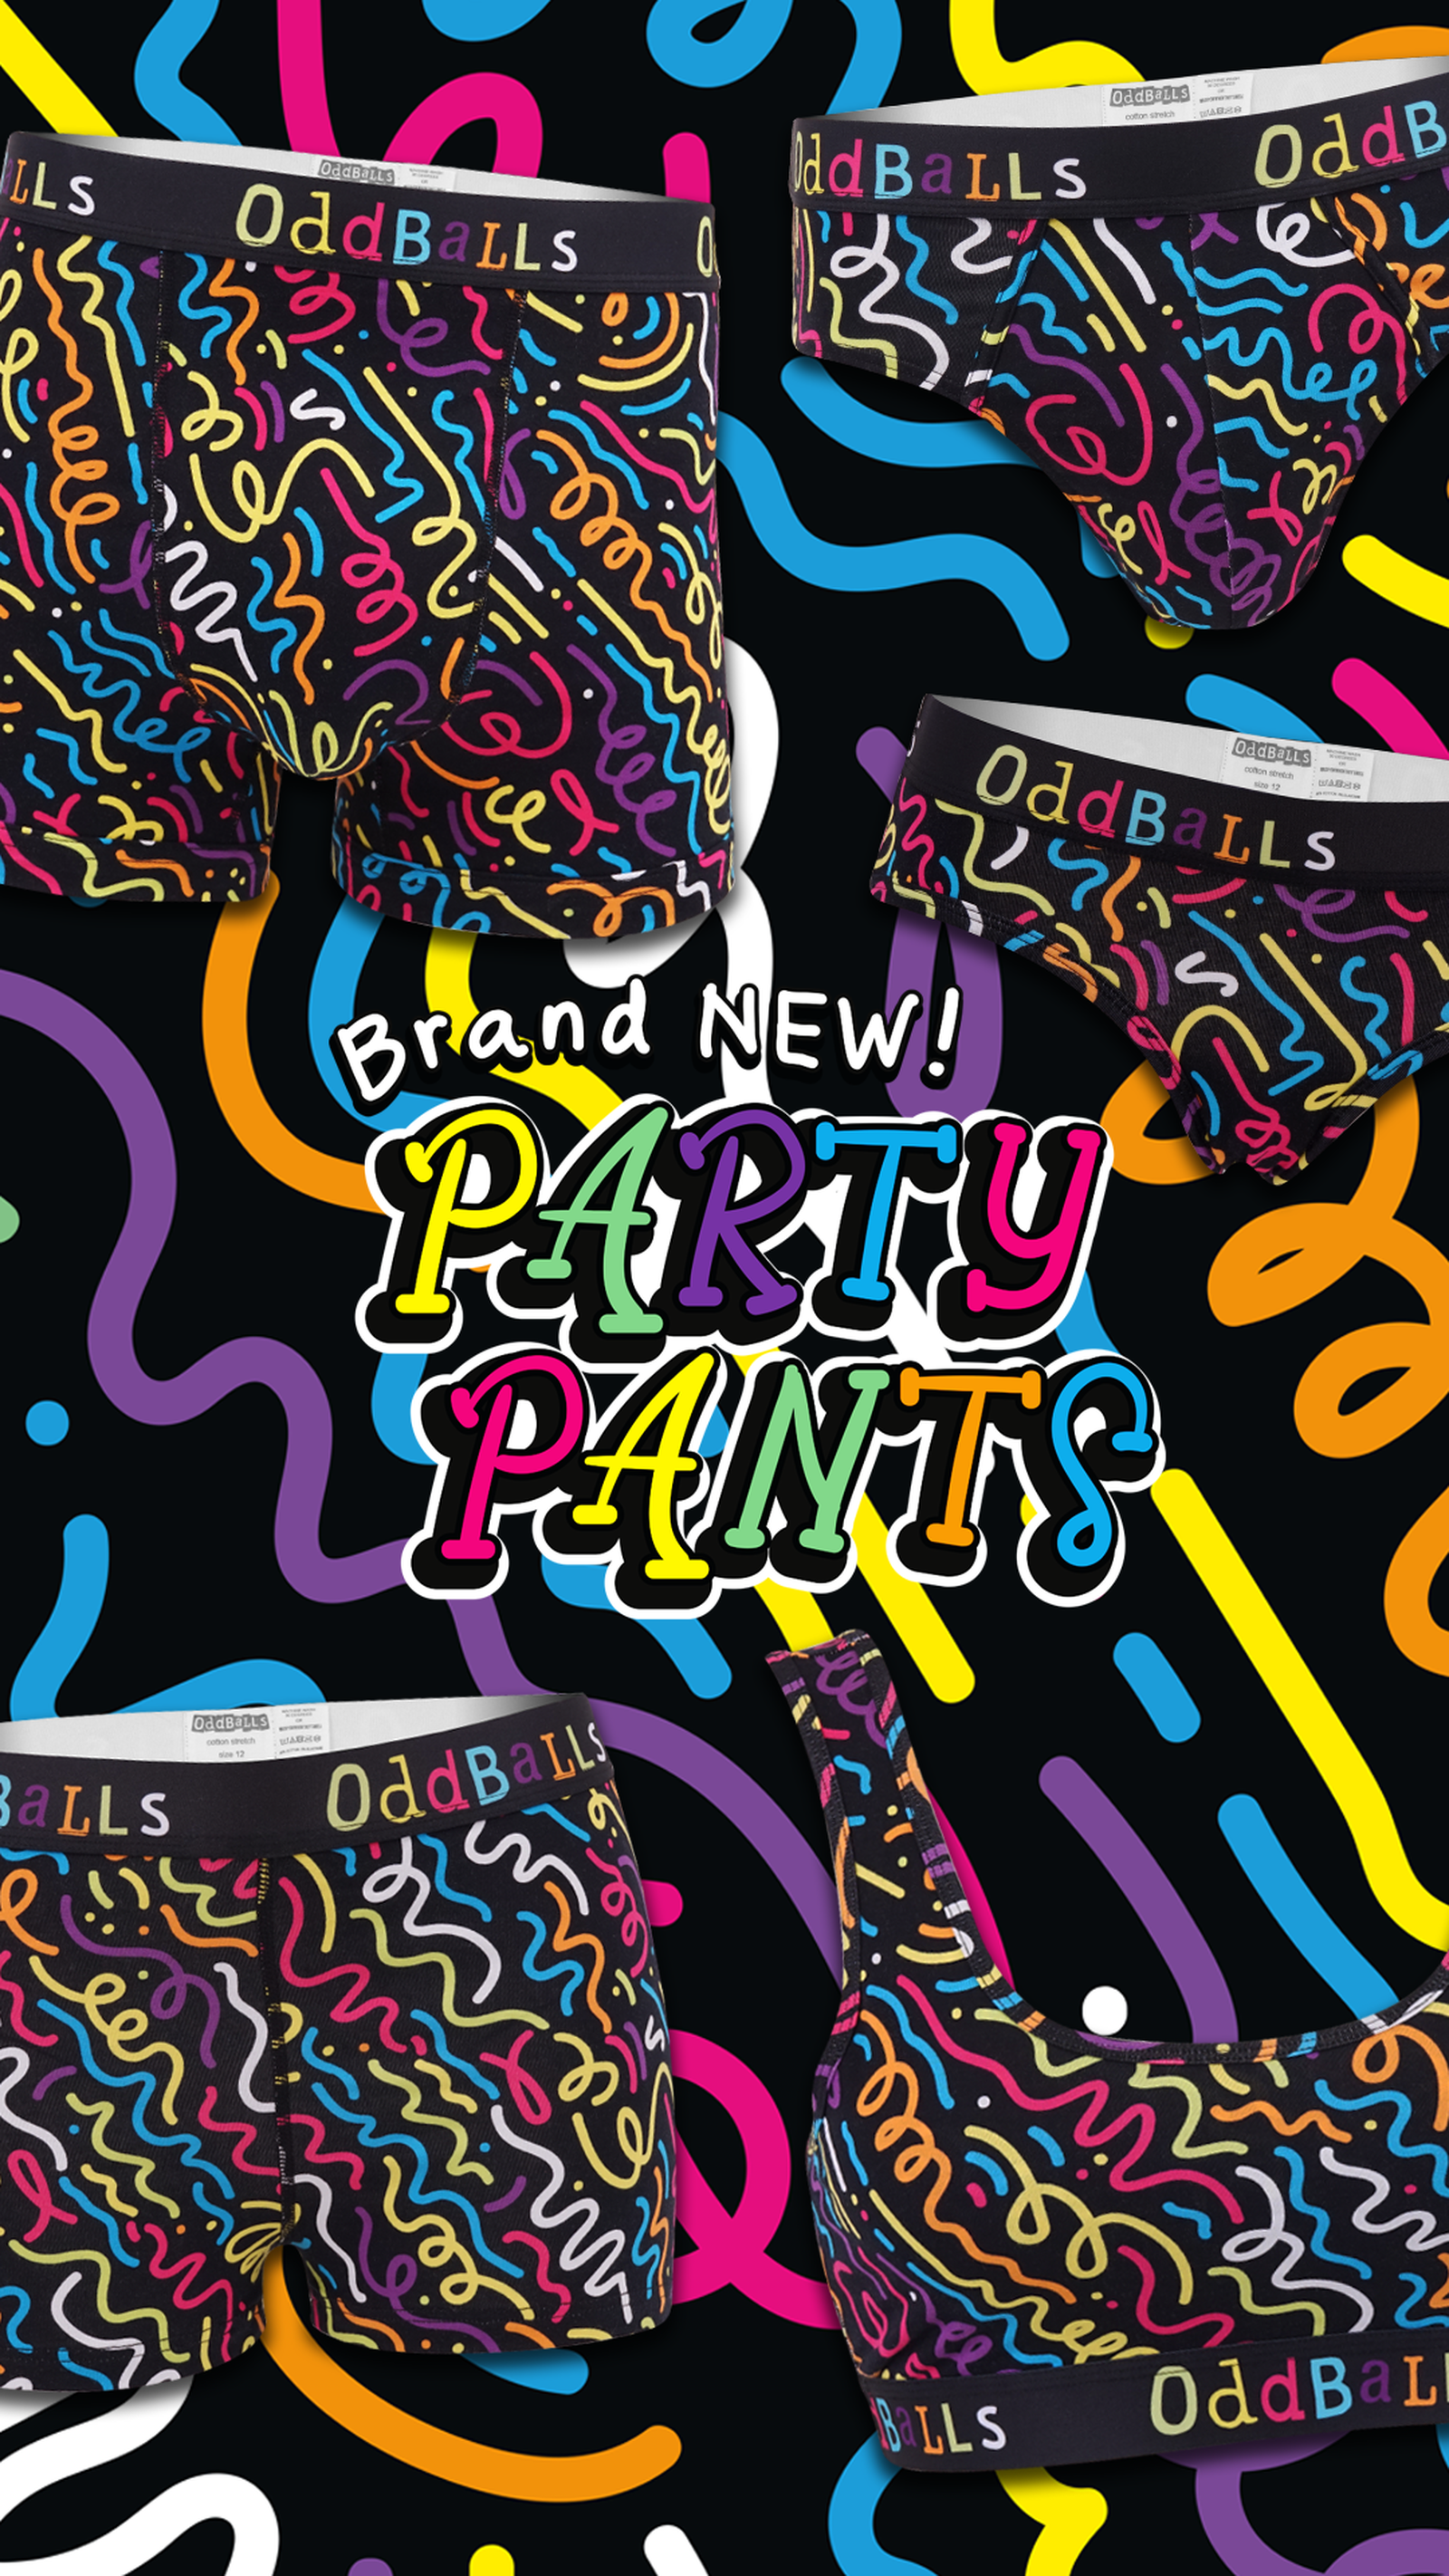 OddBalls: Limited Edition Party Pants!